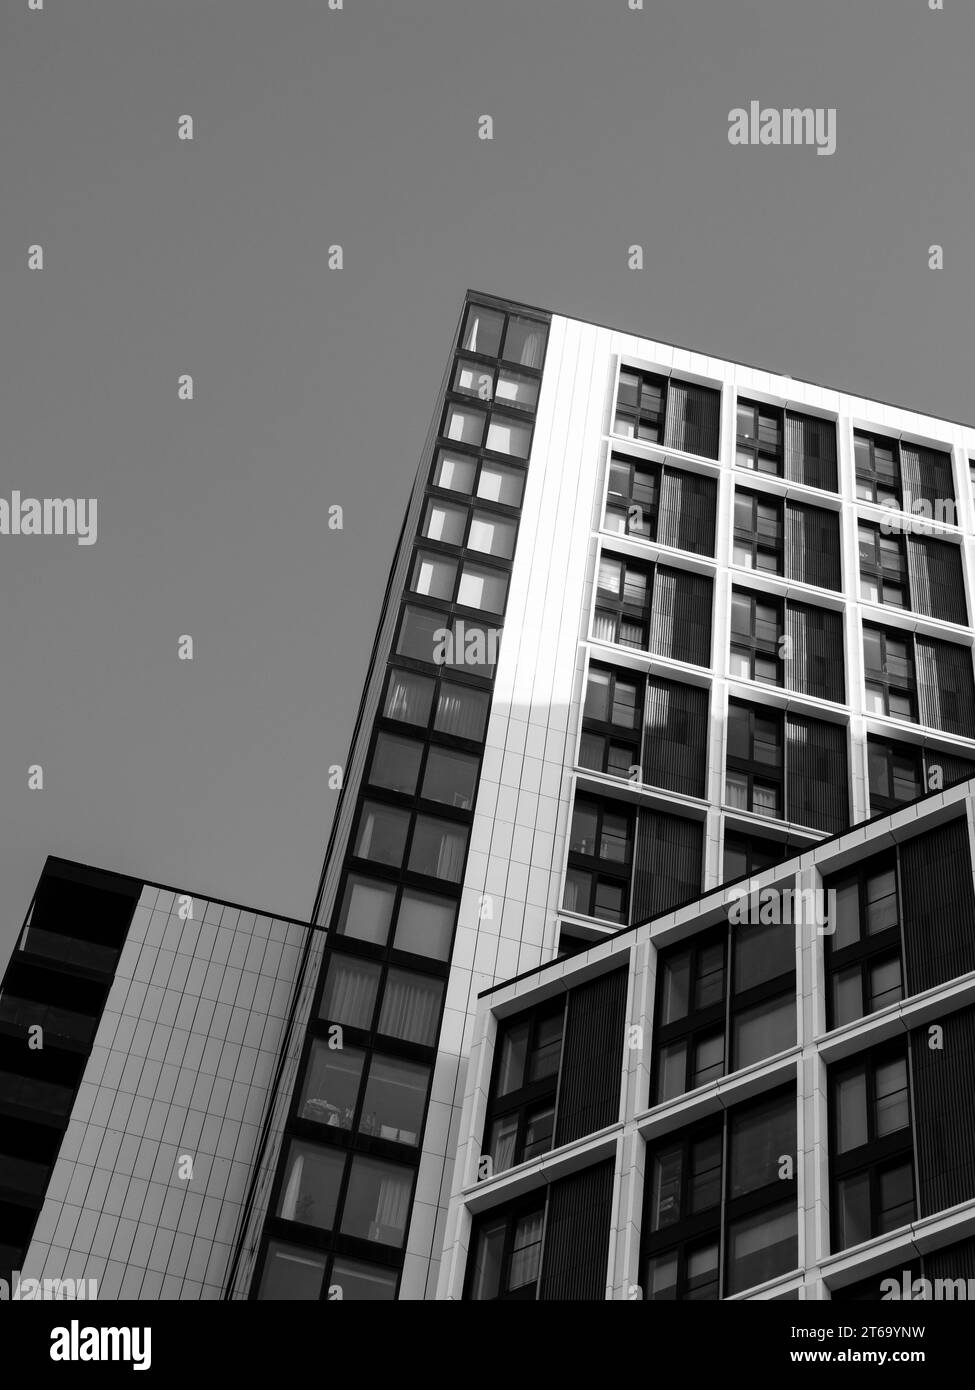 b&W The Dumont, New Luxury Housing, Albert Embankment, South London, Londres, Angleterre, Royaume-Uni, GB. Banque D'Images